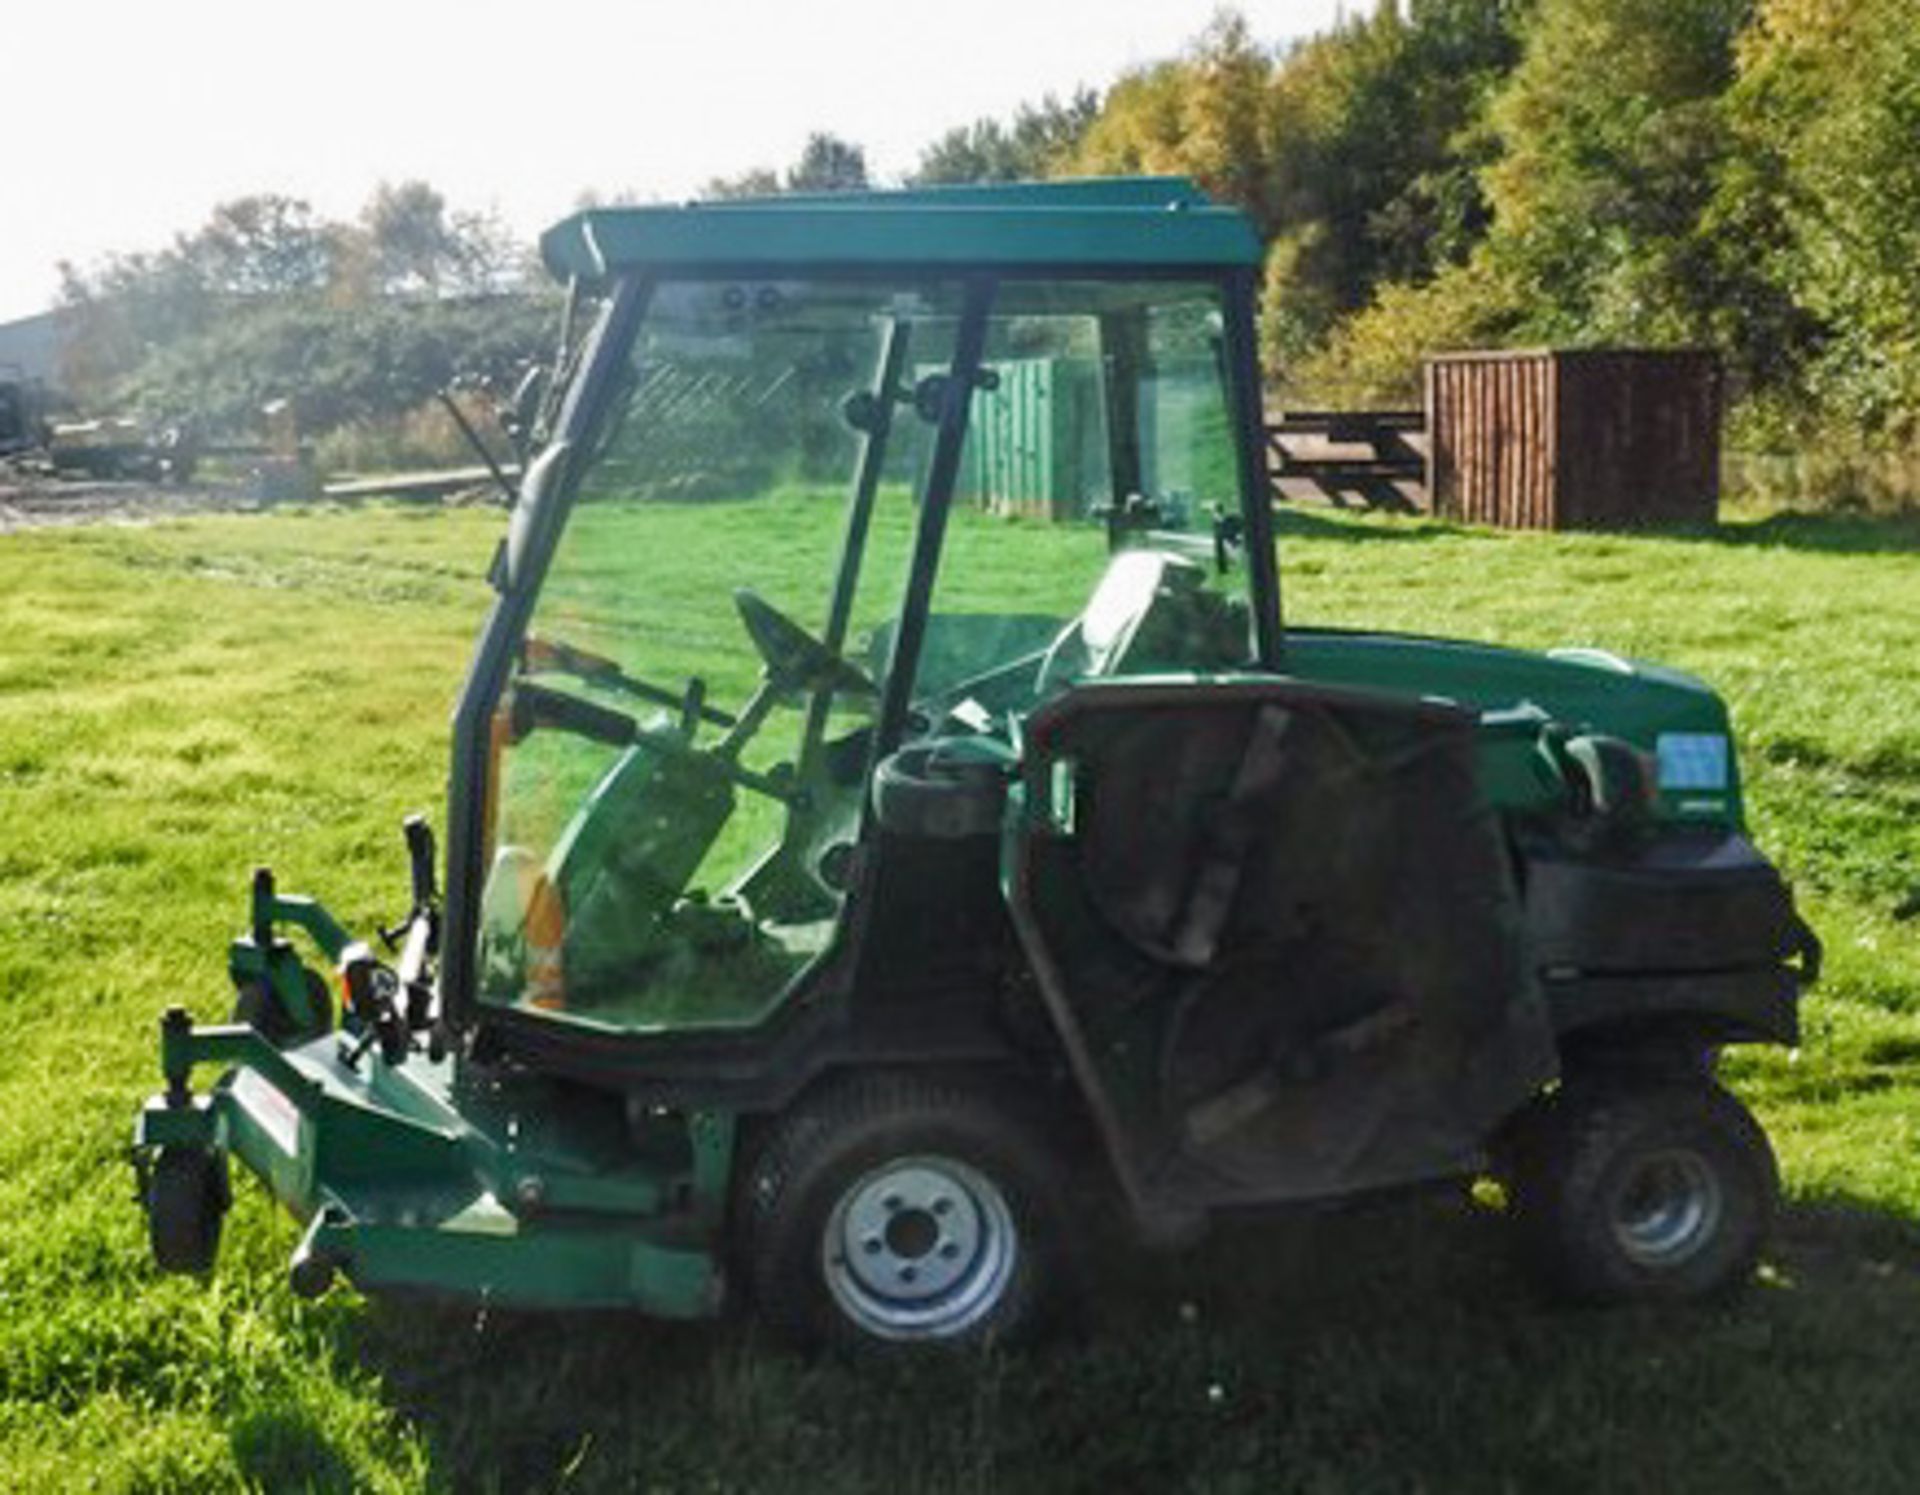 2006 RANSOME HF6010 BATWING ROTARY MOWER, CUTS APPROX 10FT 6INCHS, PERKINS 6 CYLINDER ENGINE, REG KX - Image 13 of 14